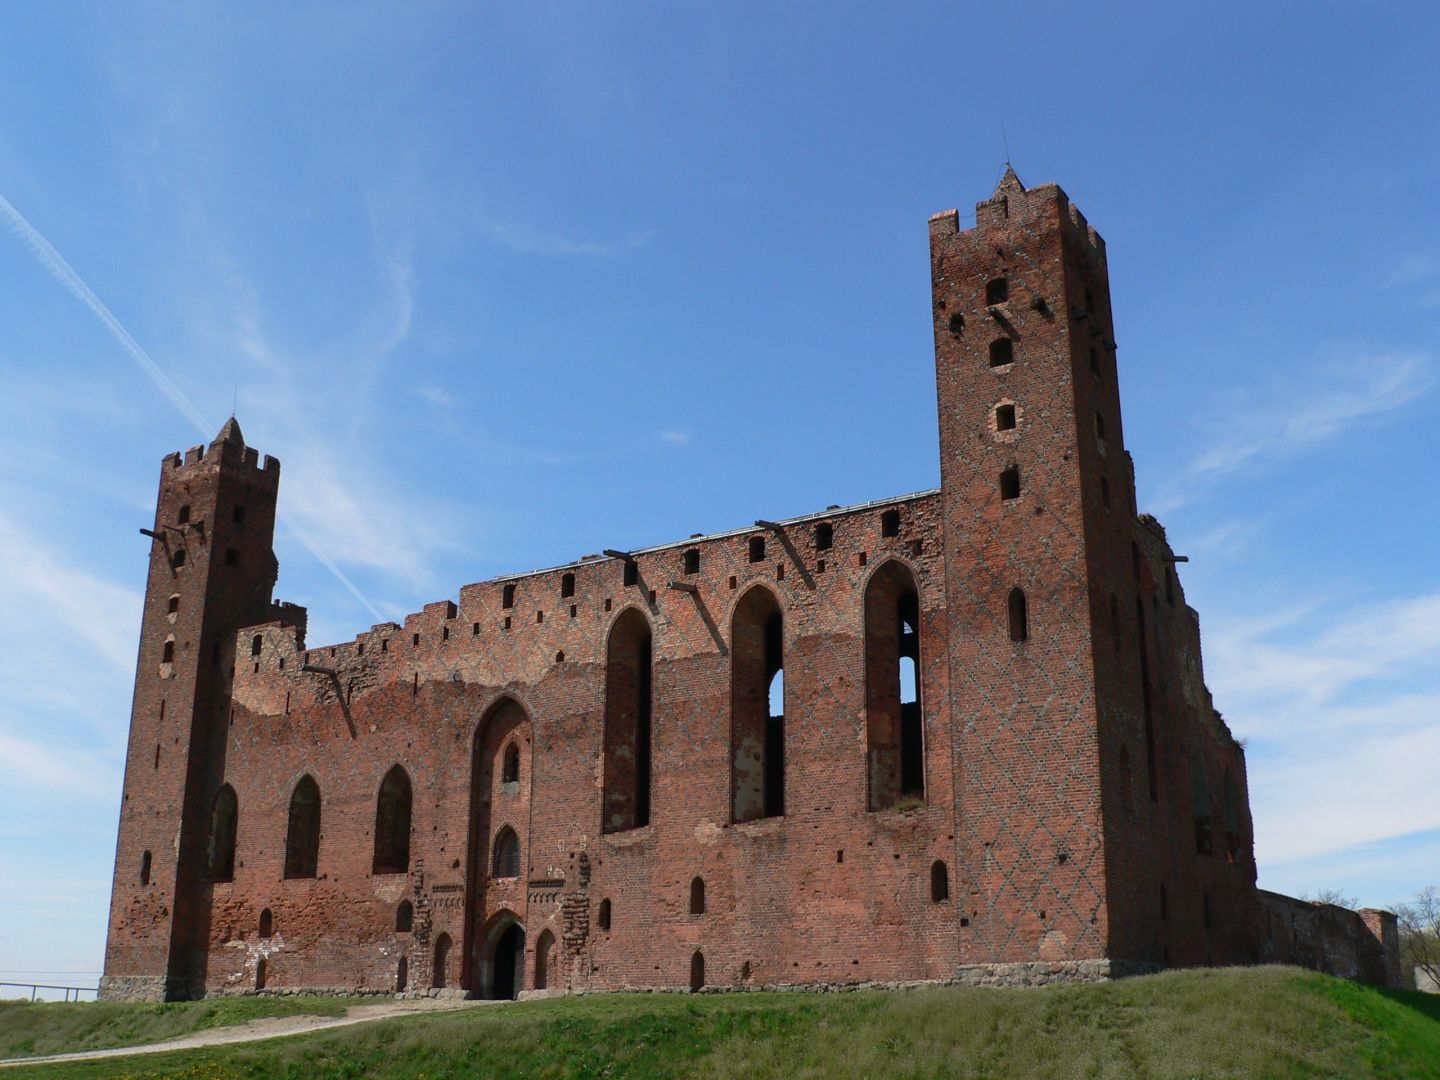 Ruins of the Teutonic Castle